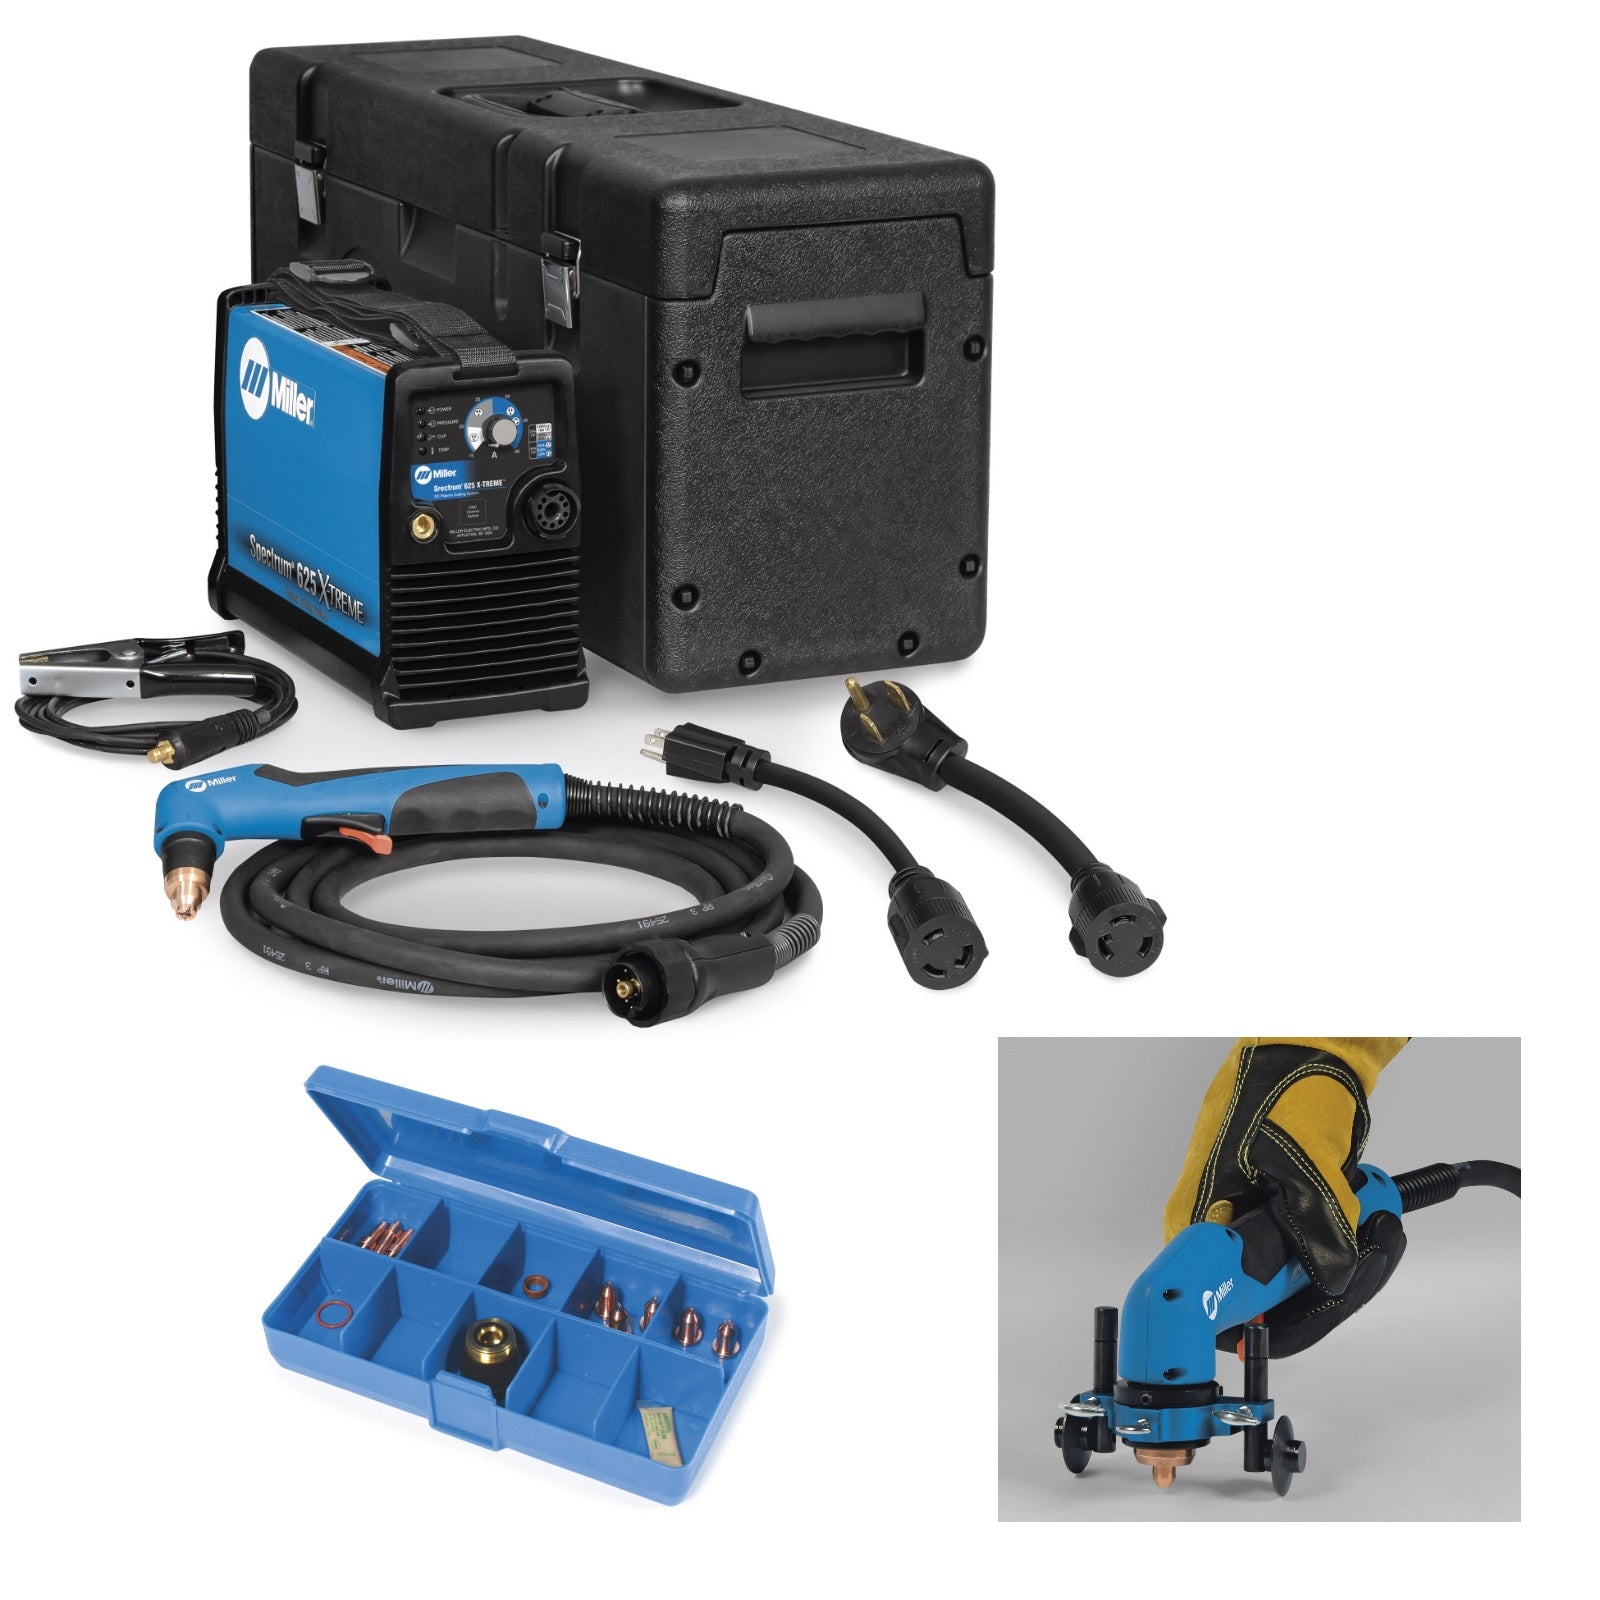 Miller Spectrum 625 X-Treme Plasma Cutter with 12 ft. Torch (907579), Consumables and Roller Guide